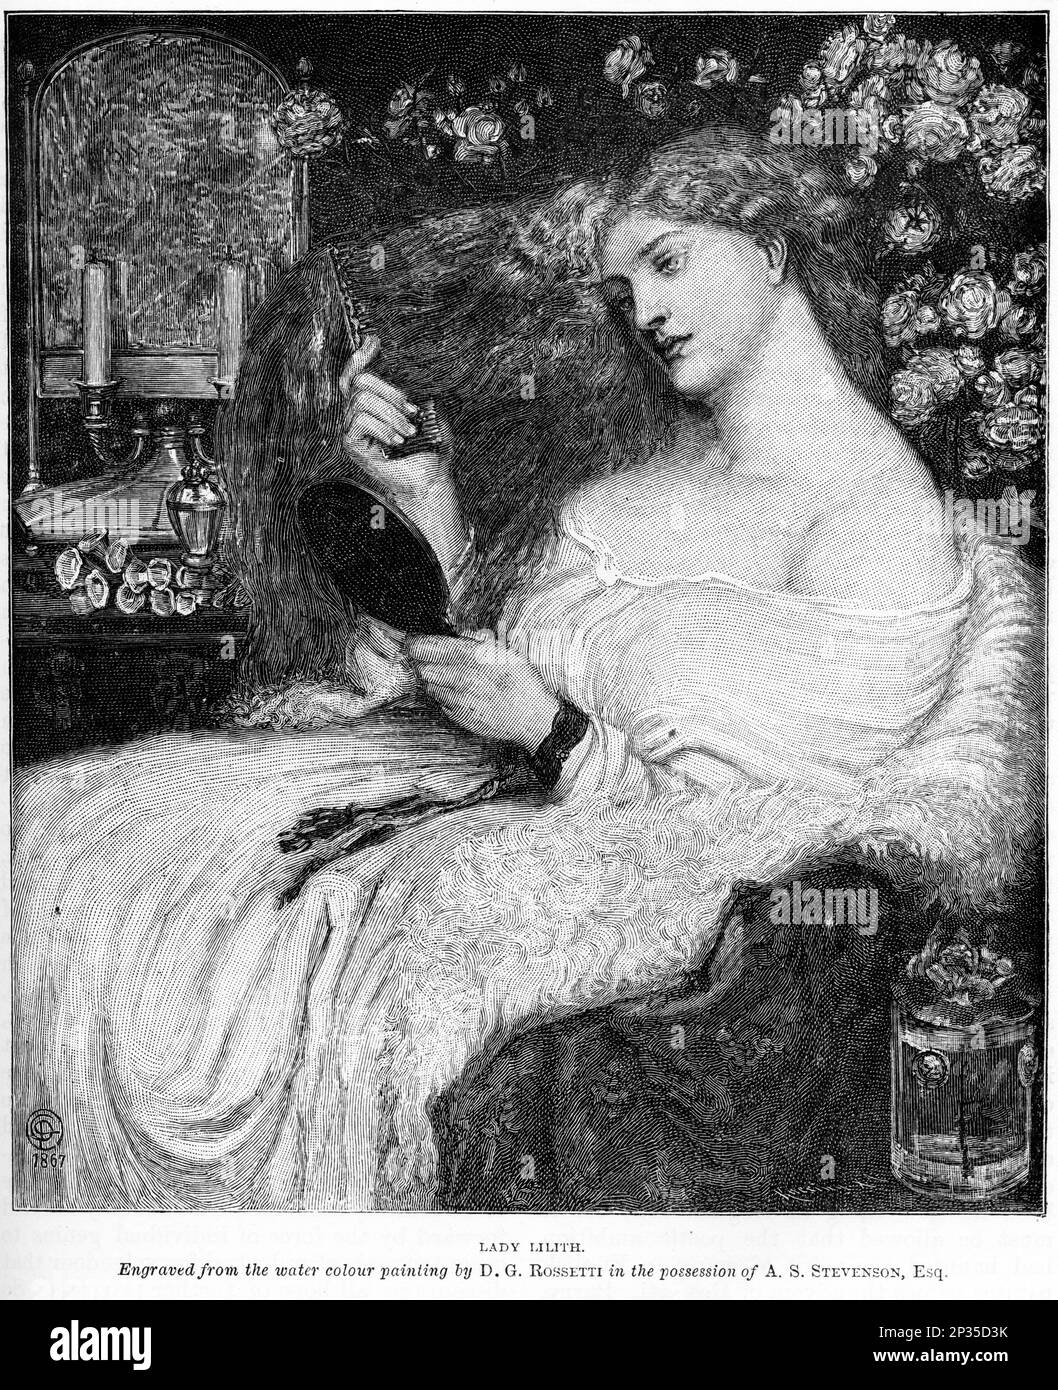 Portrait of Lady Lilith.. Artwork by D. Gabriel Rossetti. Published circa 1880 Stock Photo